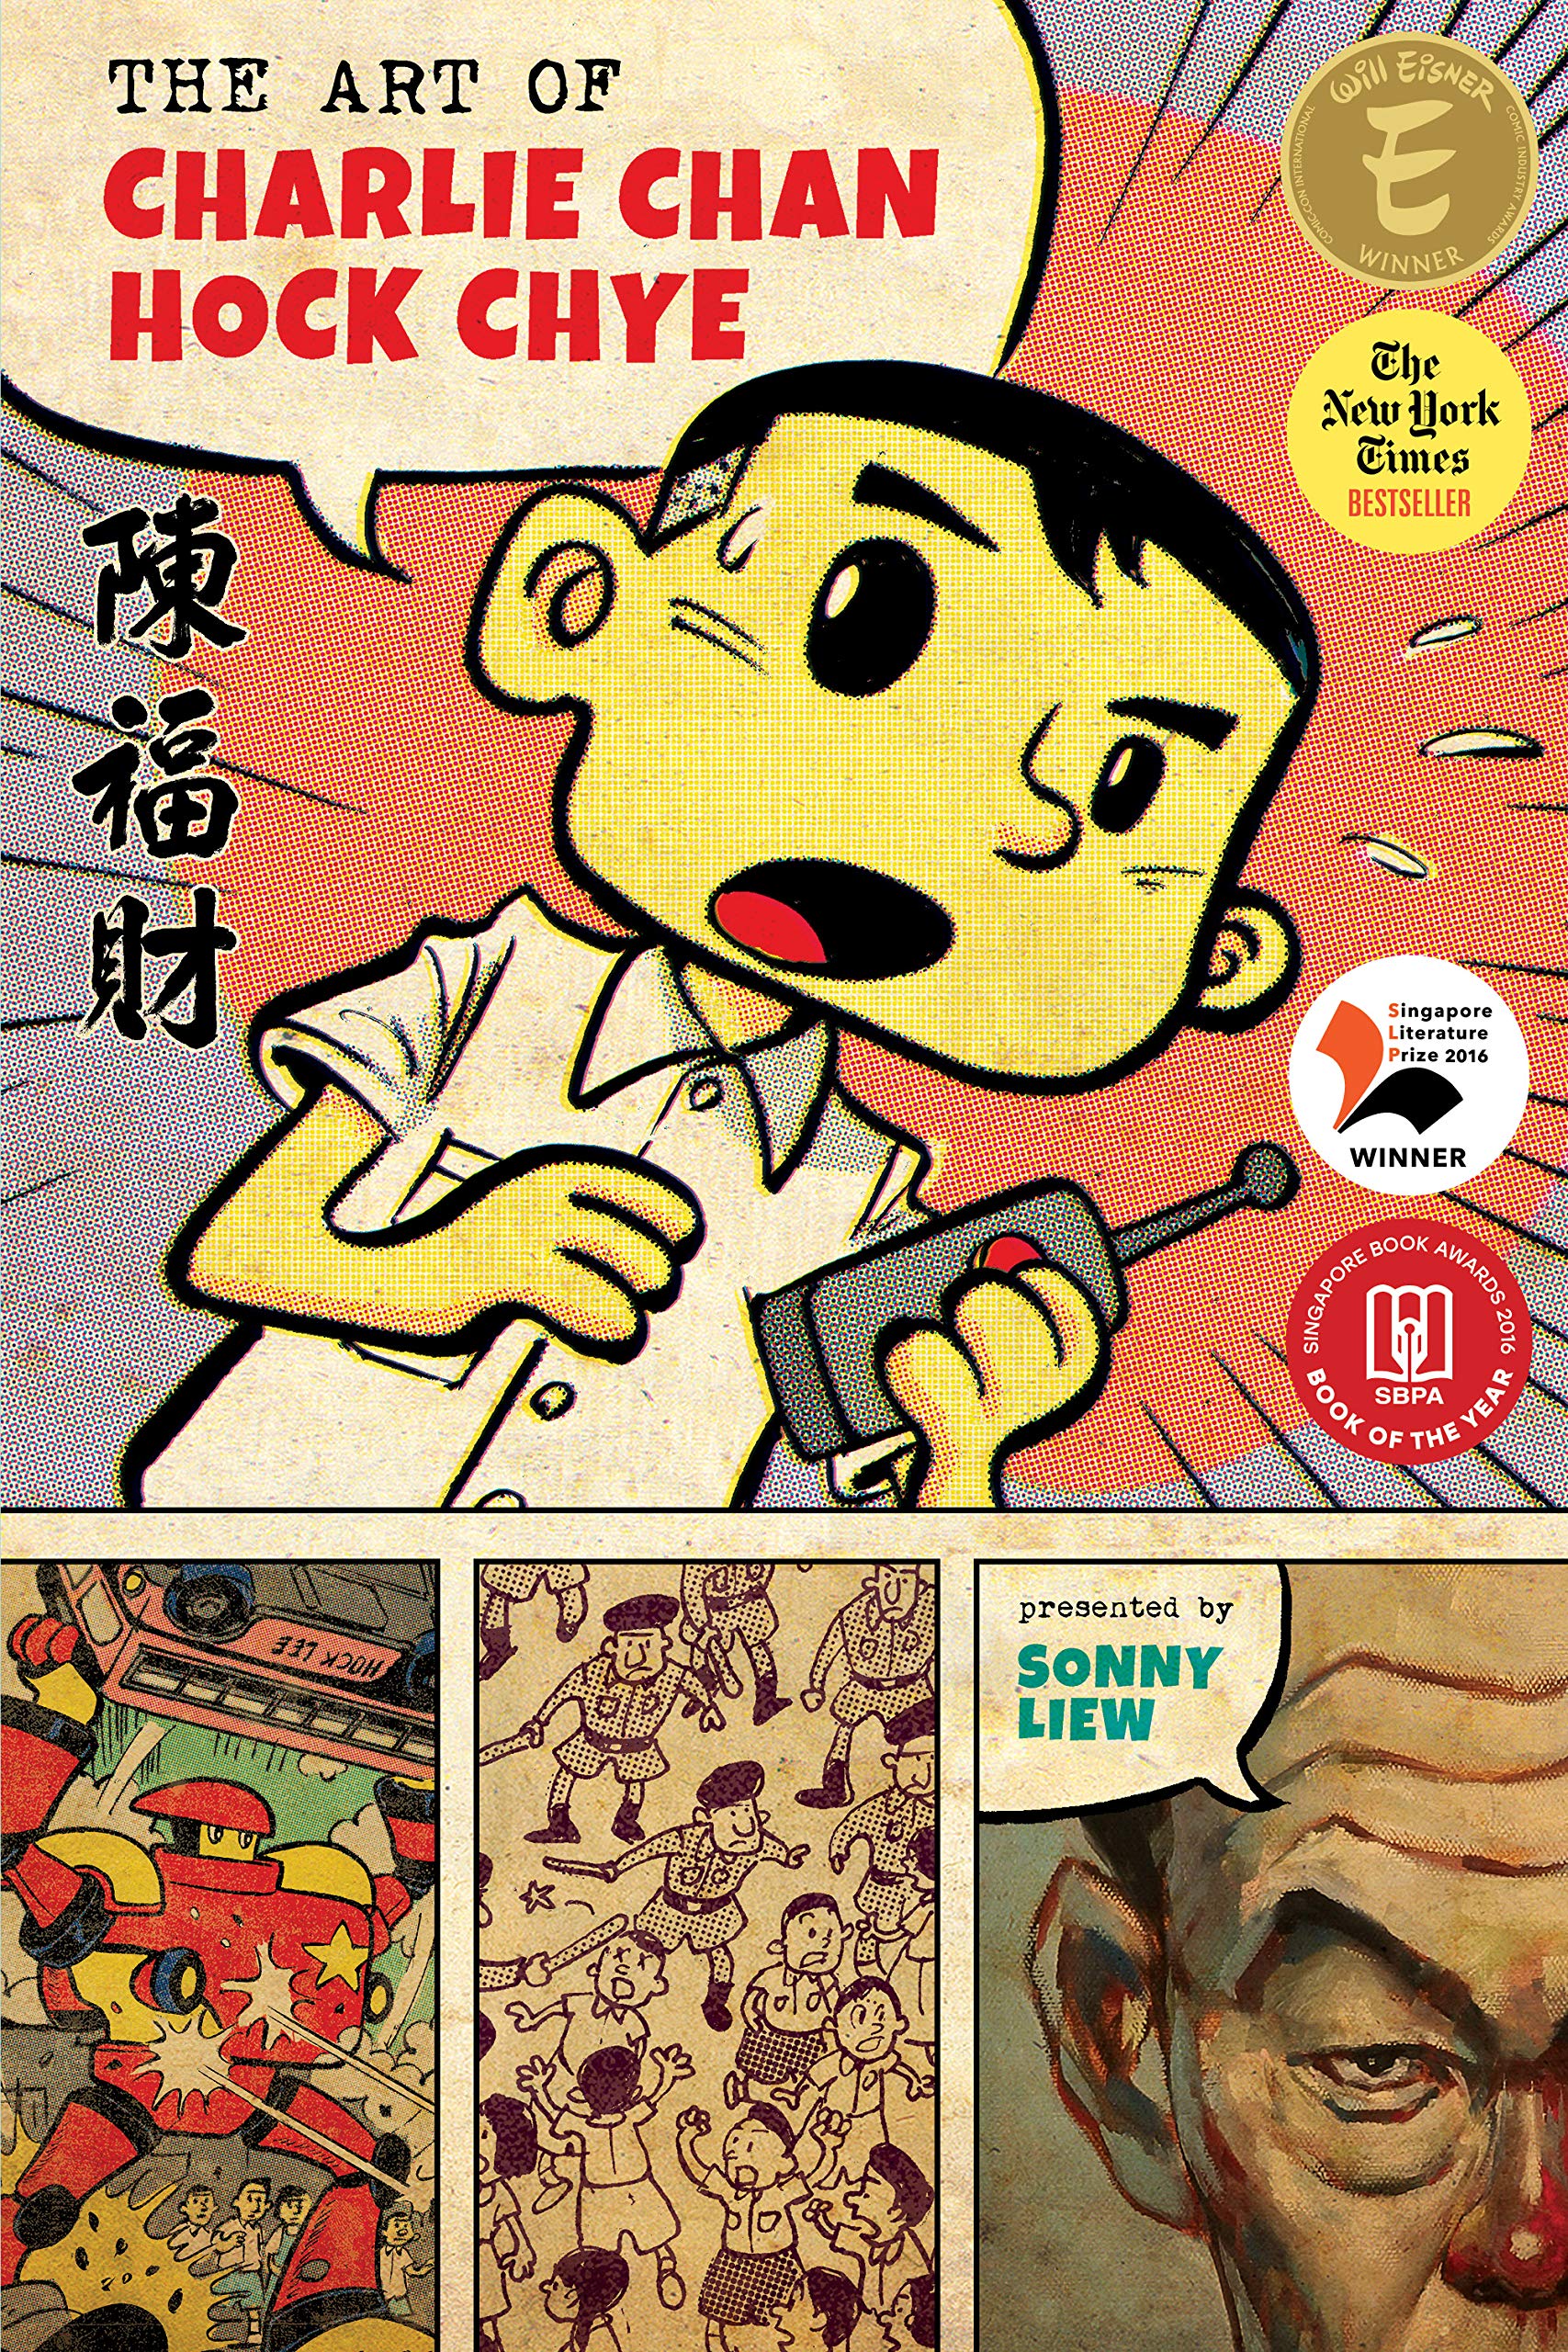 The Art Of Charlie Chan Hock Chye s/c